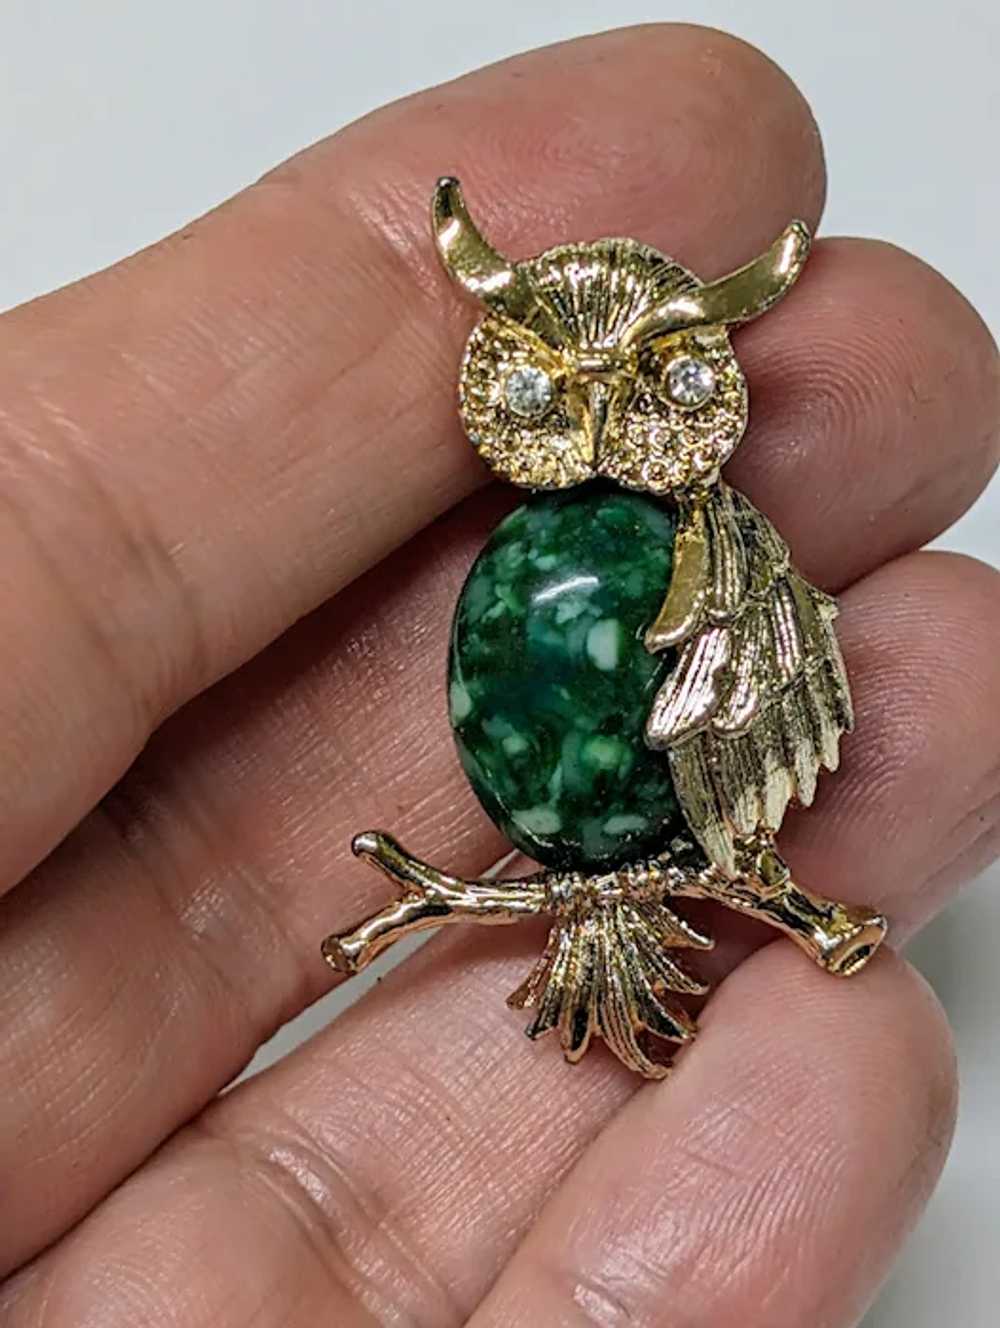 Green Jelly Belly Gerry's Gold Tone Owl Brooch - image 2